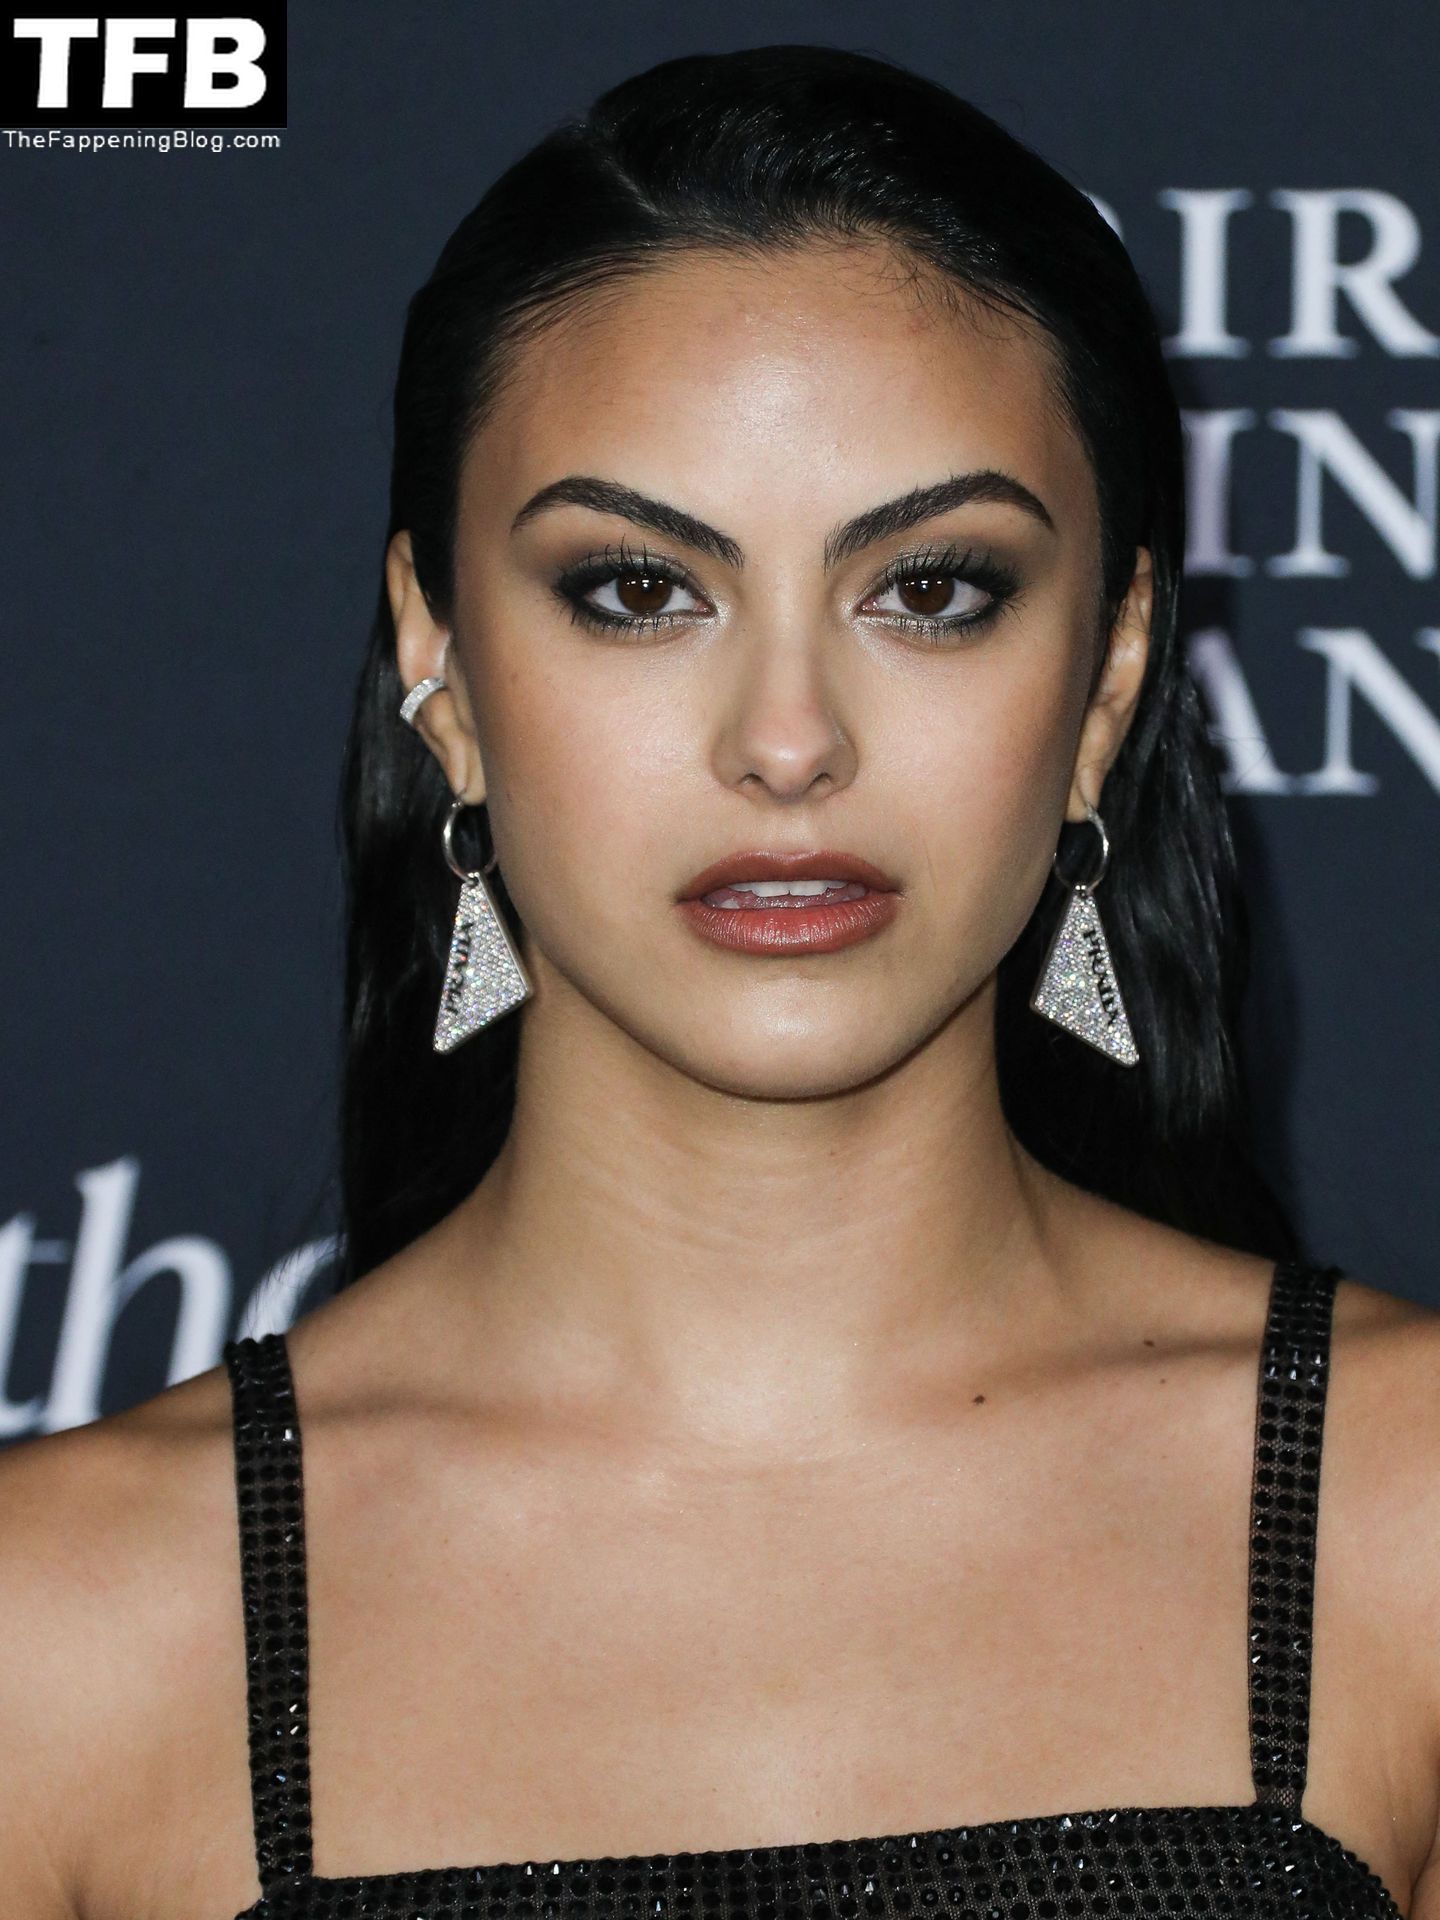 Camila-Mendes-See-Through-Tits-The-Fappening-Blog-12.jpg